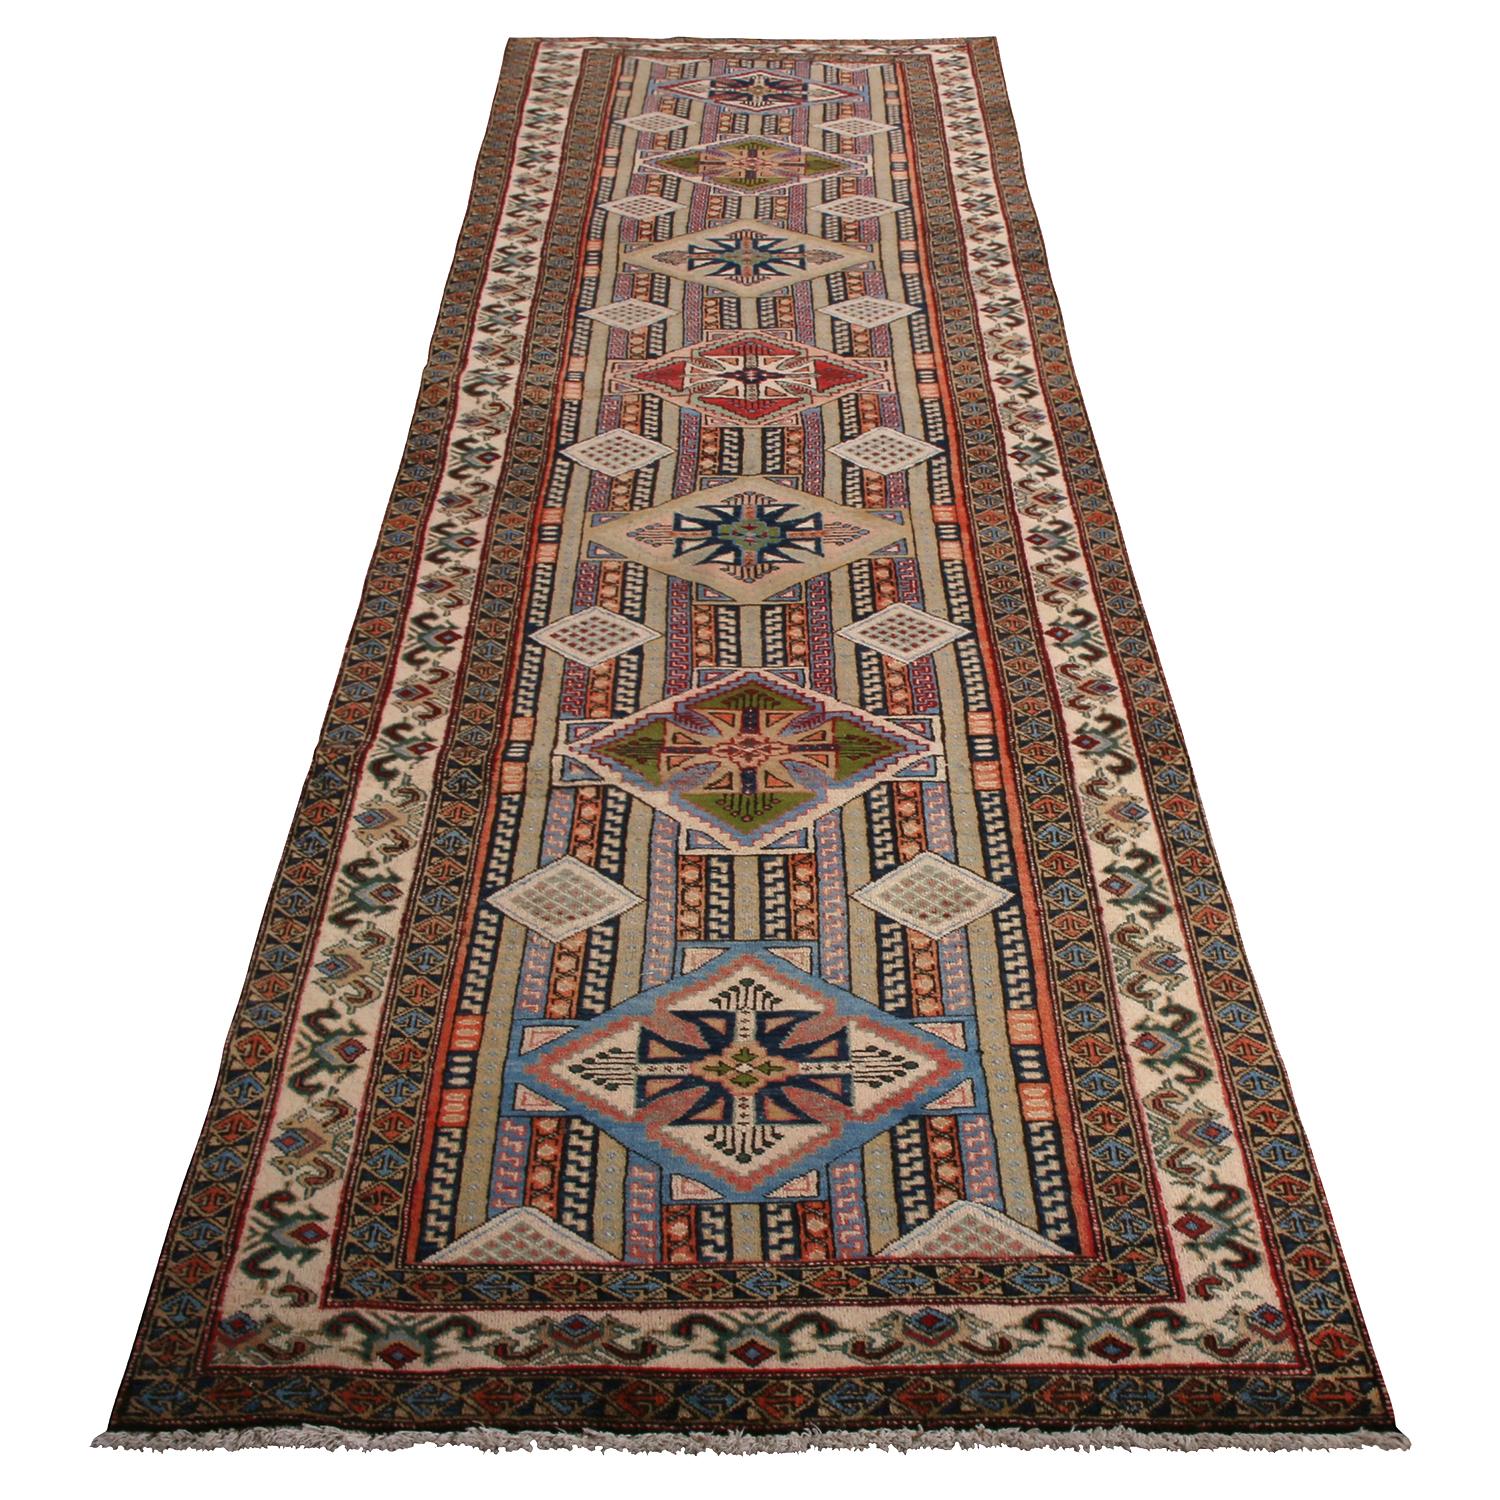 Hand knotted in lush wool pile originating from Persia between 1950-1960, this vintage midcentury Azerbaijan runner enjoys both excellent condition and a notably meticulous, skillful achievement in the play of geometry and colorway variation in this